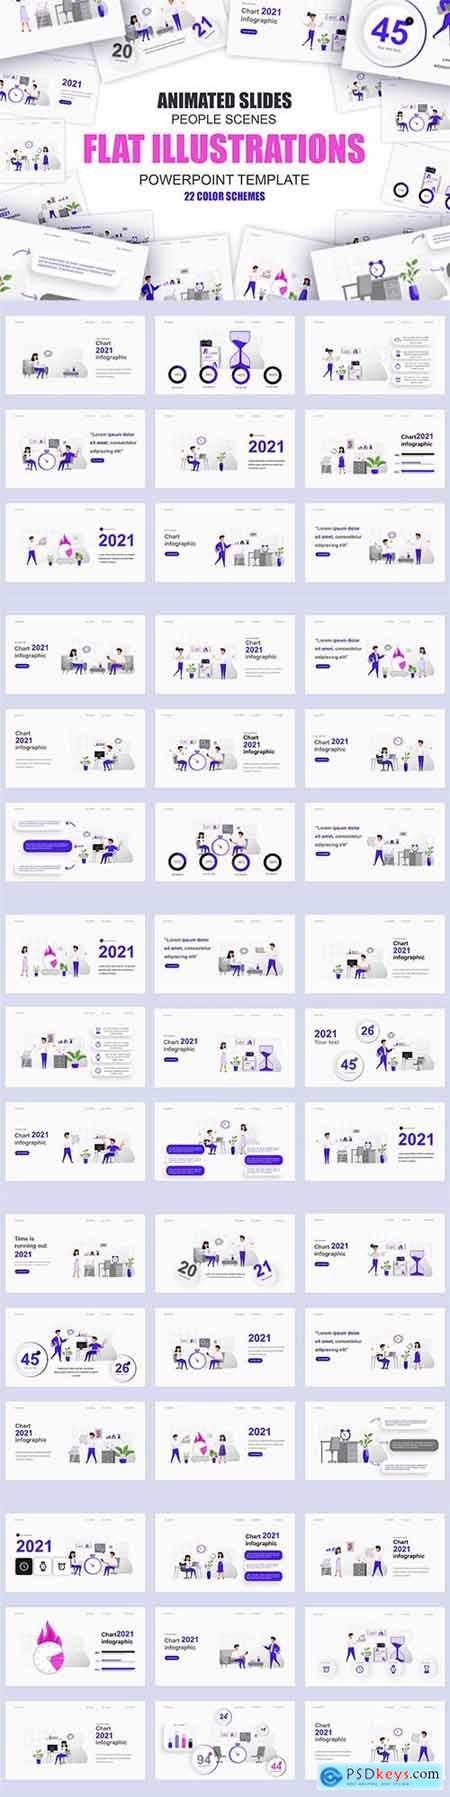 Business Illustration Powerpoint Template